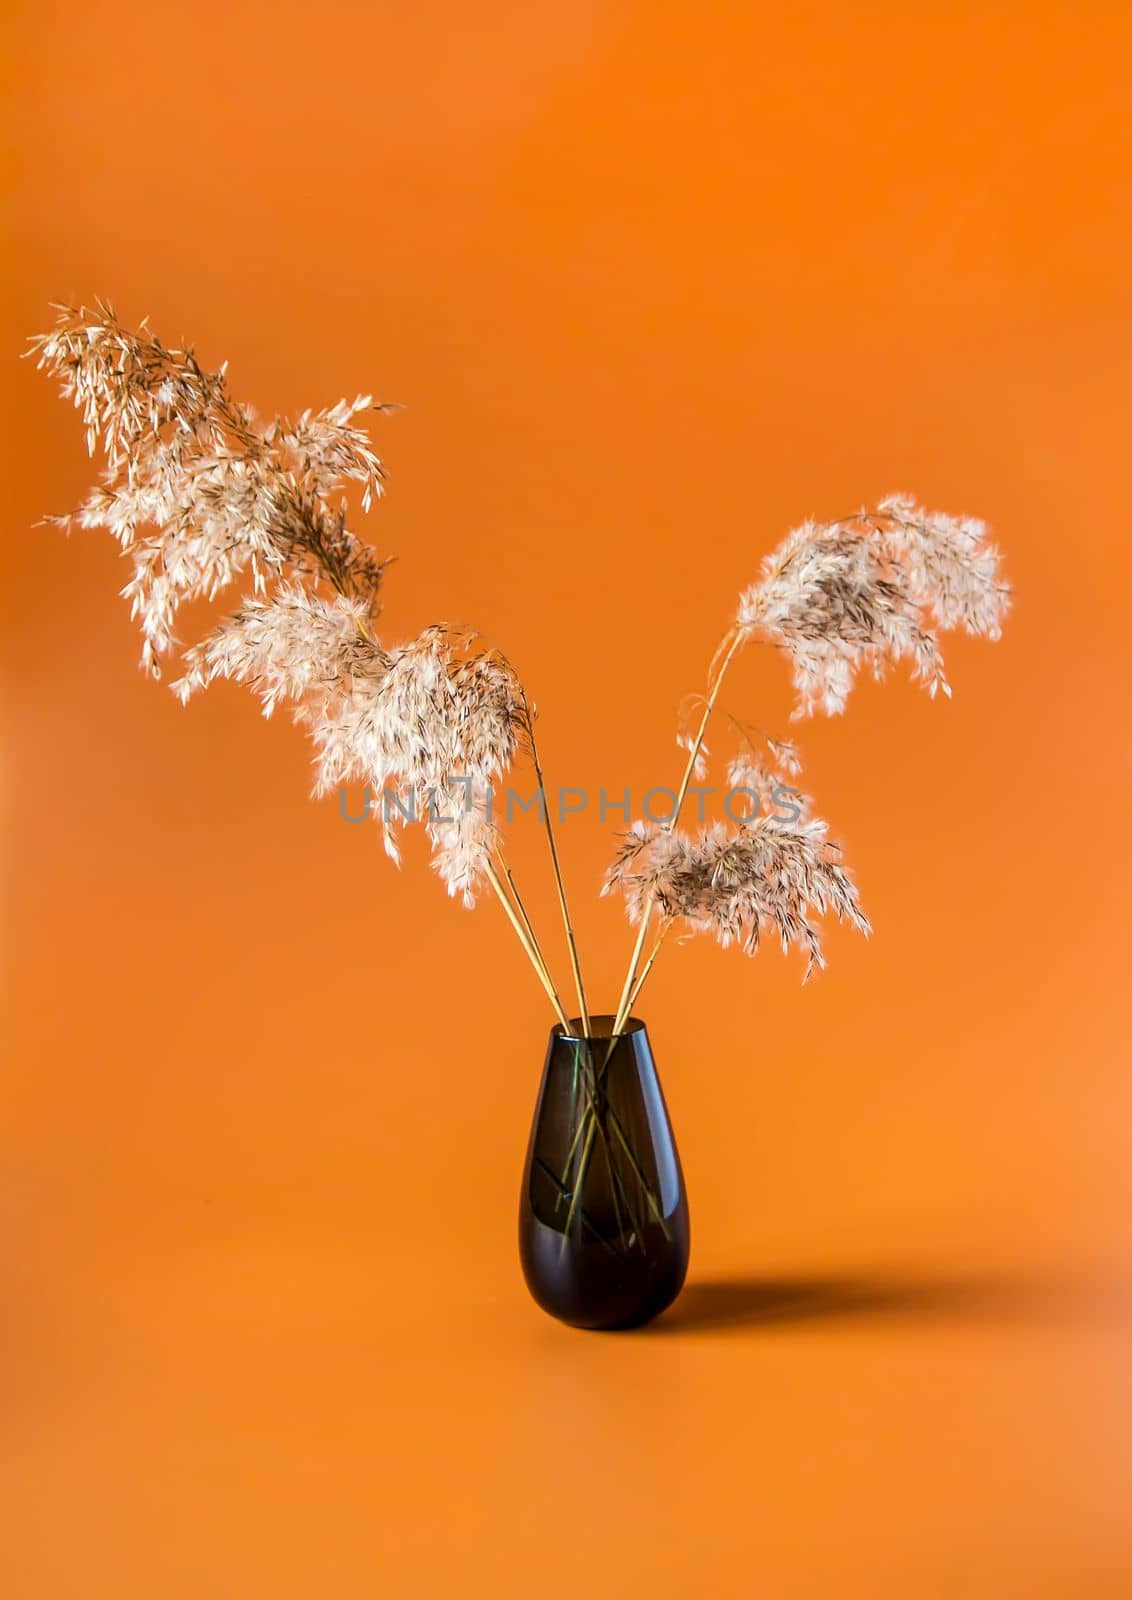 Dry plants in a vase. Interior decor. by nightlyviolet